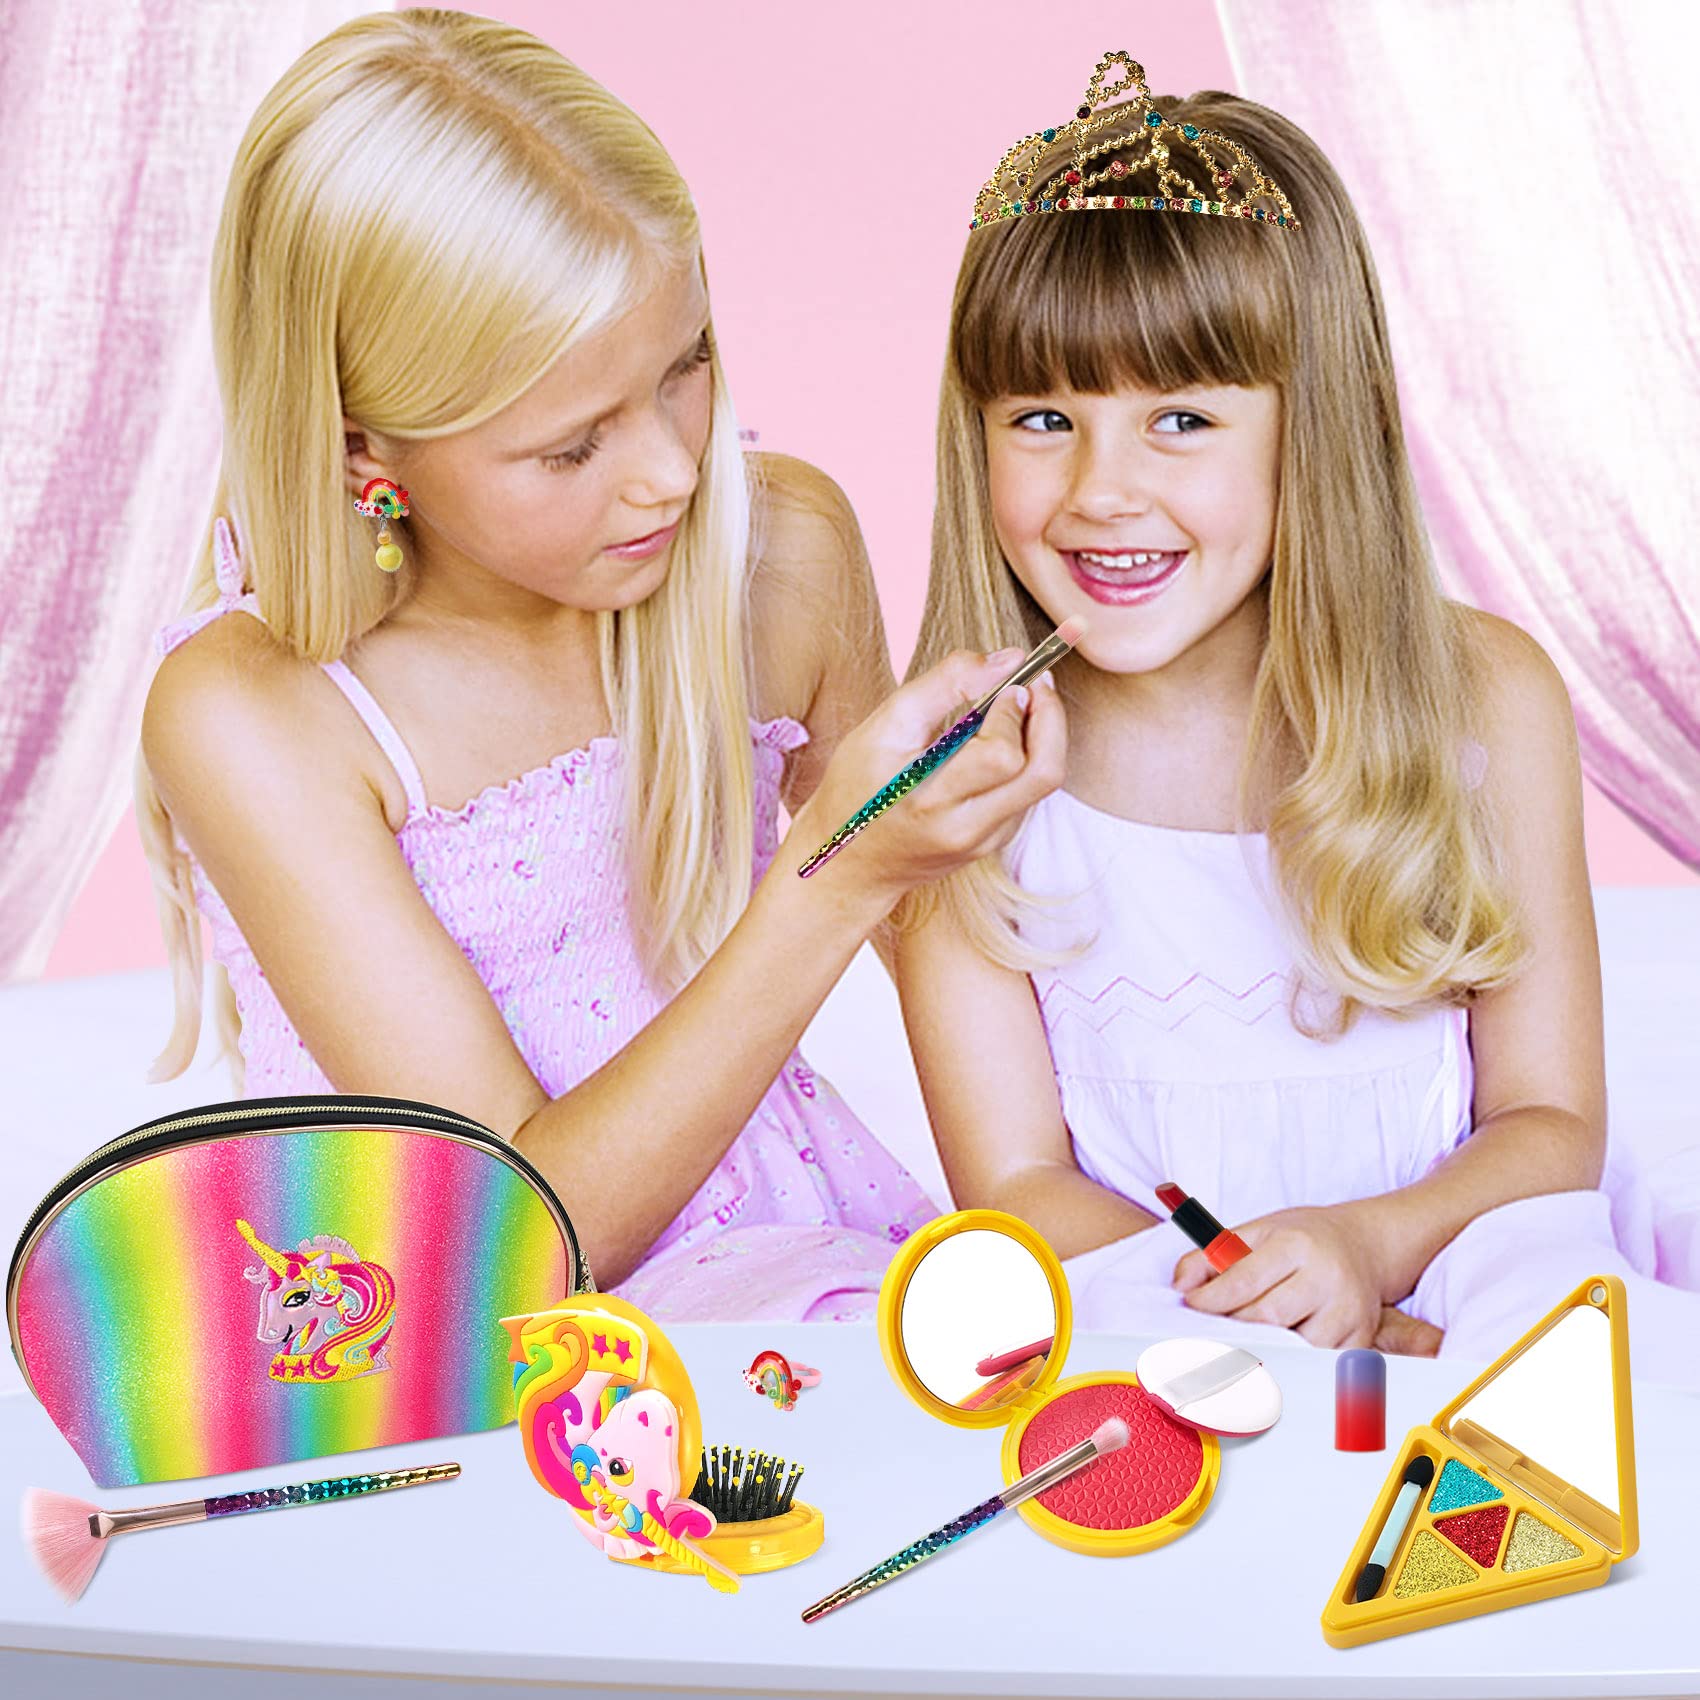 Heyzeibo Princess Dress Up Clothes & Pretend Play, Pretend Makeup Starter Kit with Purse, Crown, Shoes Jewelry for 3-12 Years Old Girls Toddler Birthday Halloween Christmas Costumes Party